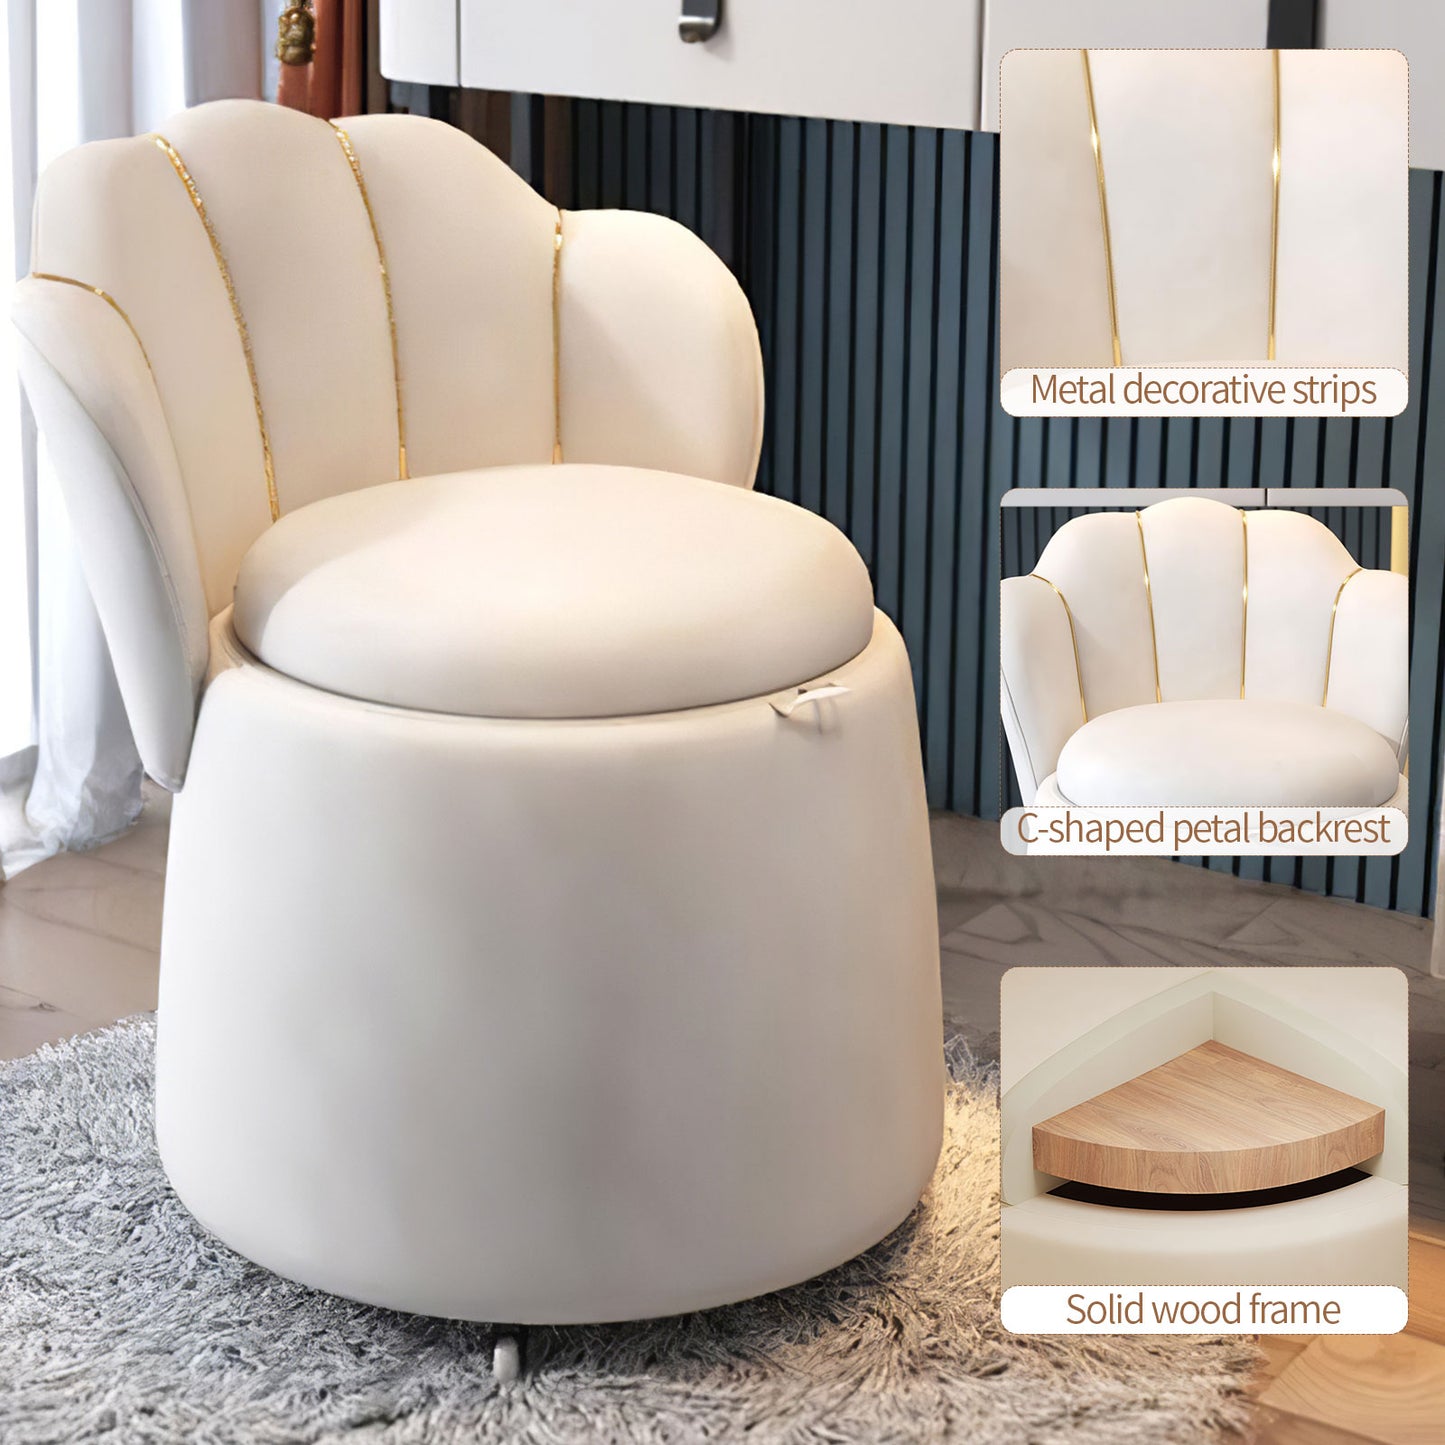 Makeup Vanity Chair,Begonia-Shaped chair Vanity Stool with Built-in Storage and Comfortable Backrest (White)